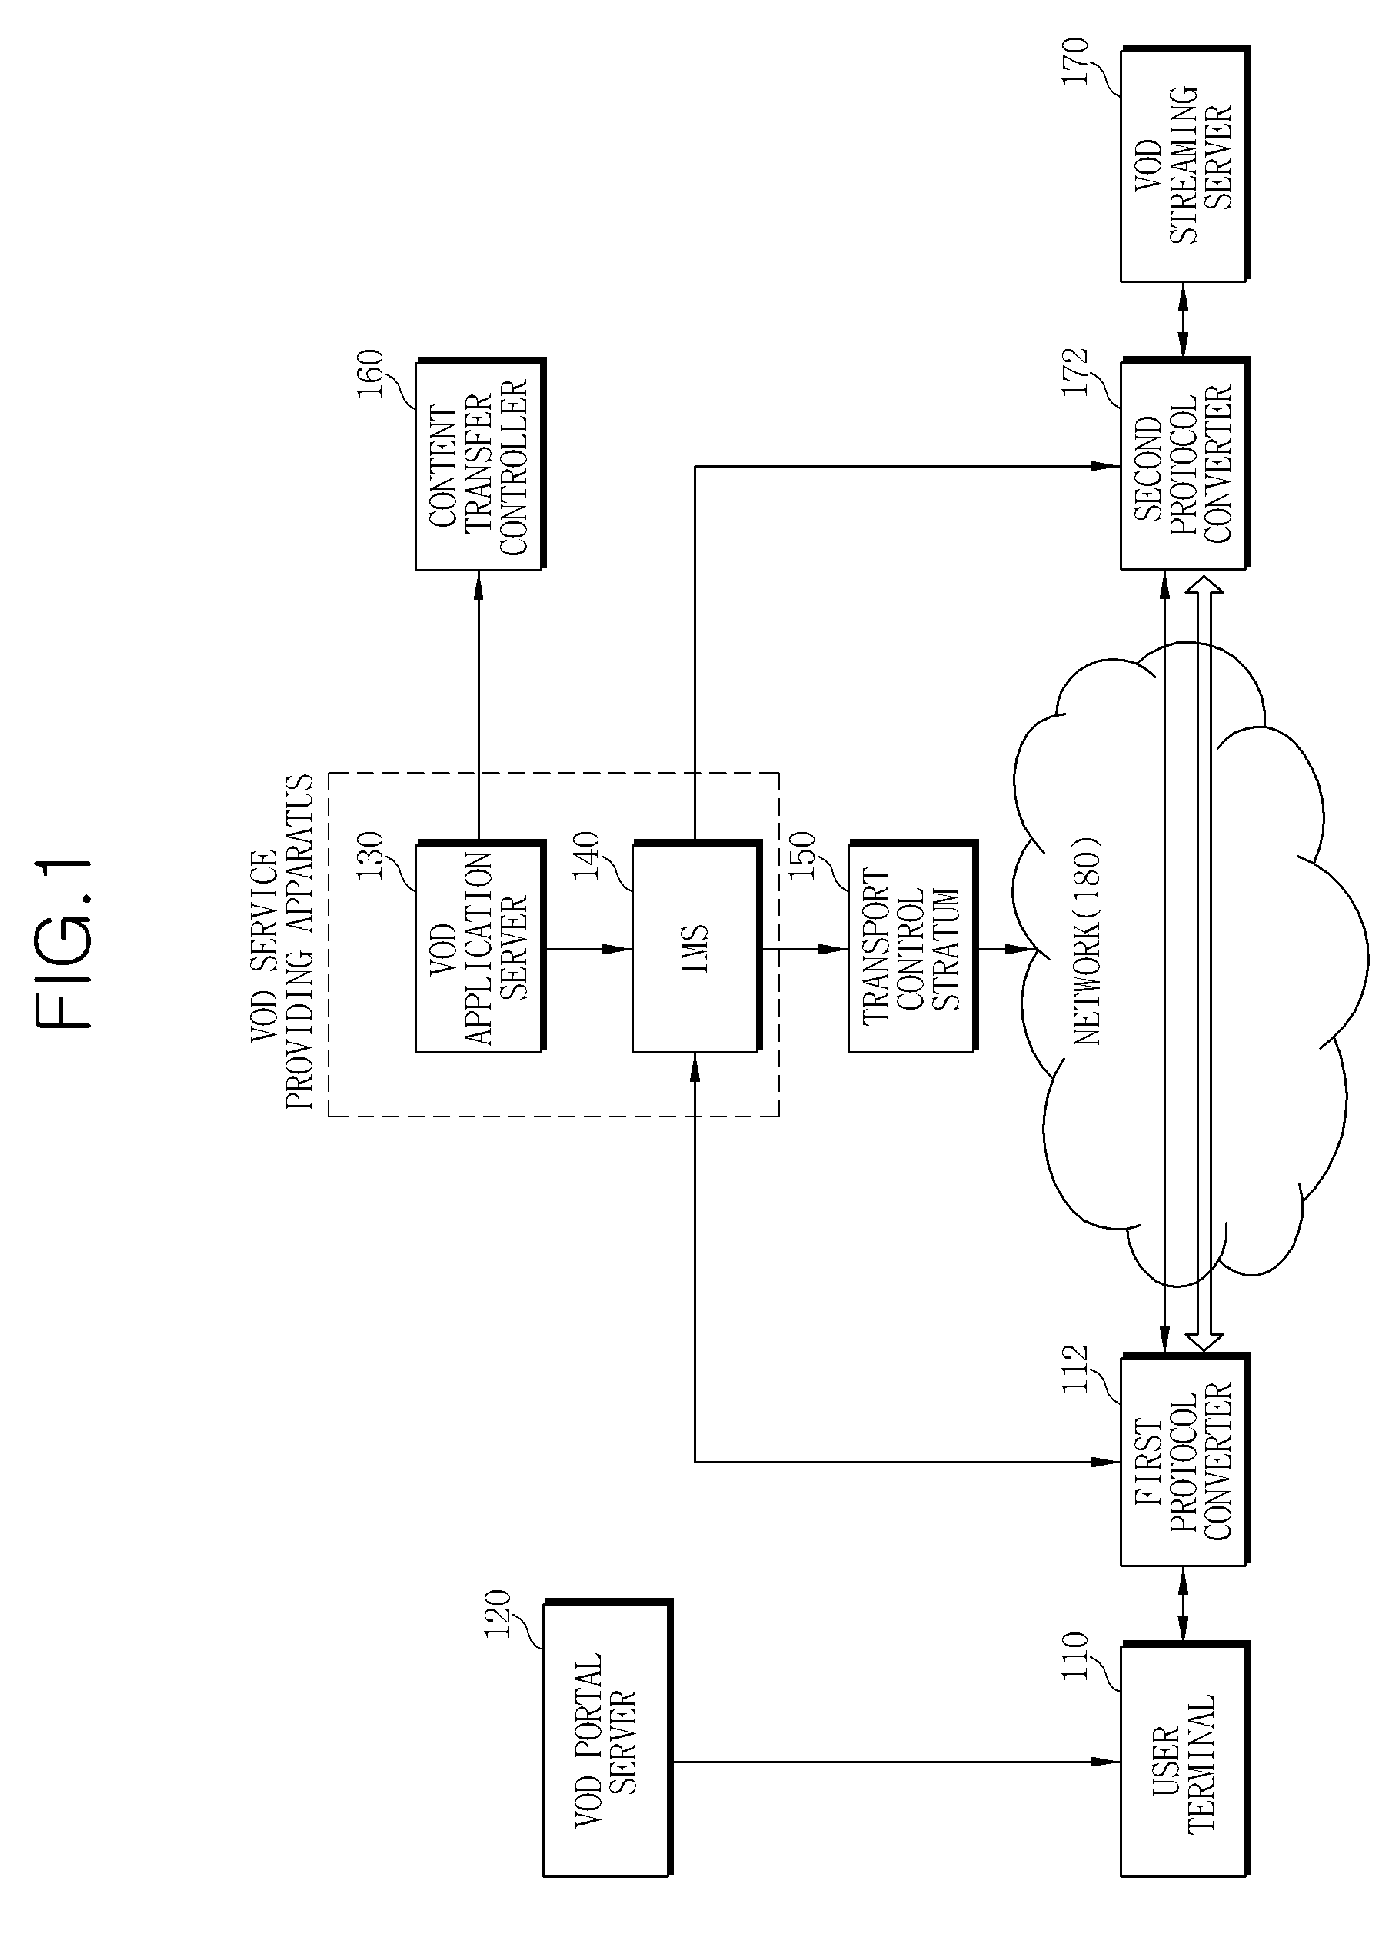 Method and apparatus for providing video-on-demand service based on internet protocol (IP) multimedia subsystem